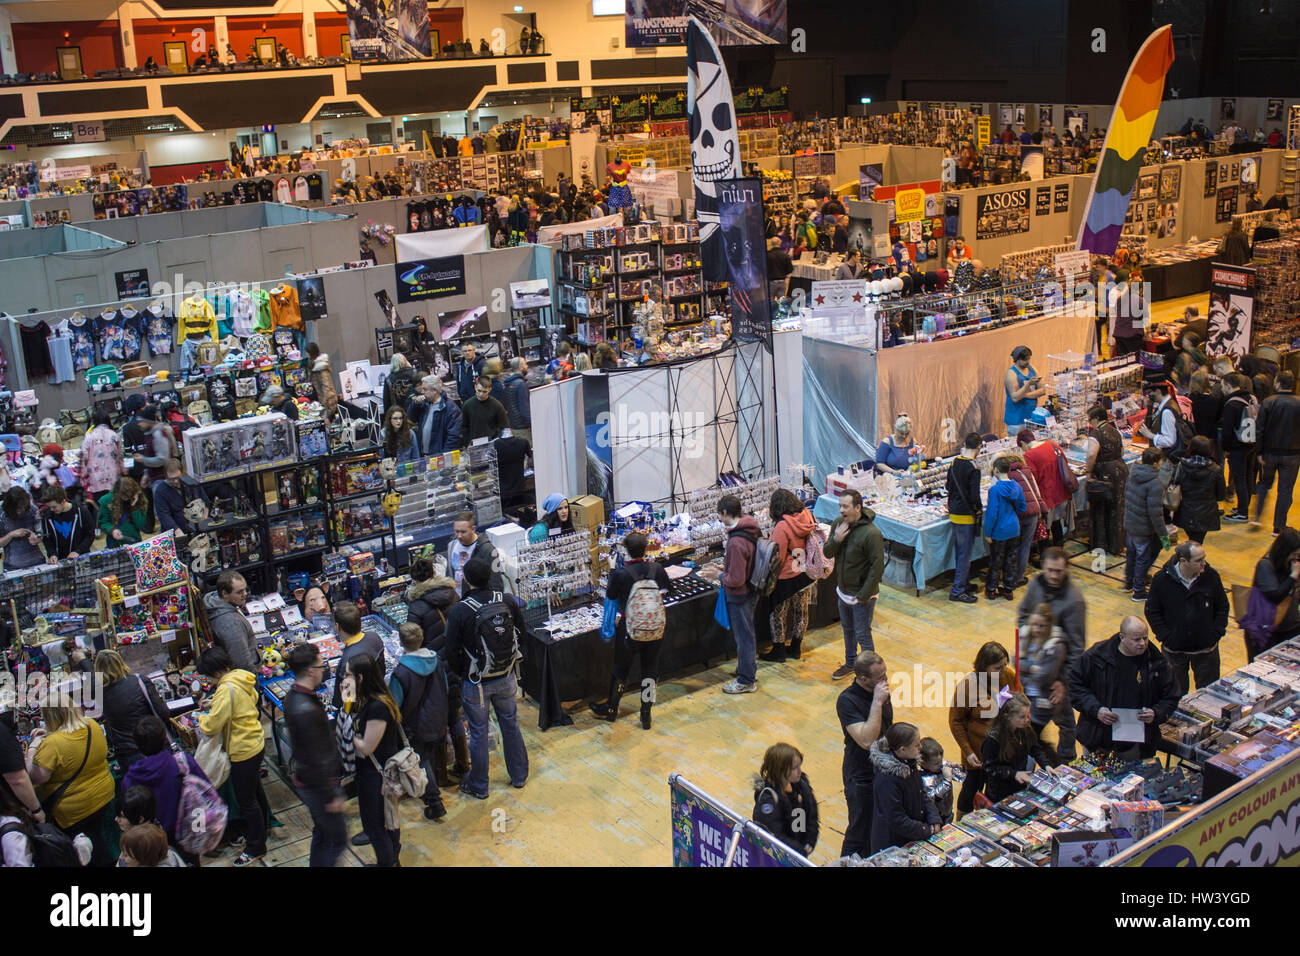 CARDIFF, UNITED KINGDOM. March 4, 2017. Film & Comic Con 2016 was held at Cardiff Motorpoint Arena in March this year where people come and meet each other dressed in cosplay and buy merchandise. Stock Photo